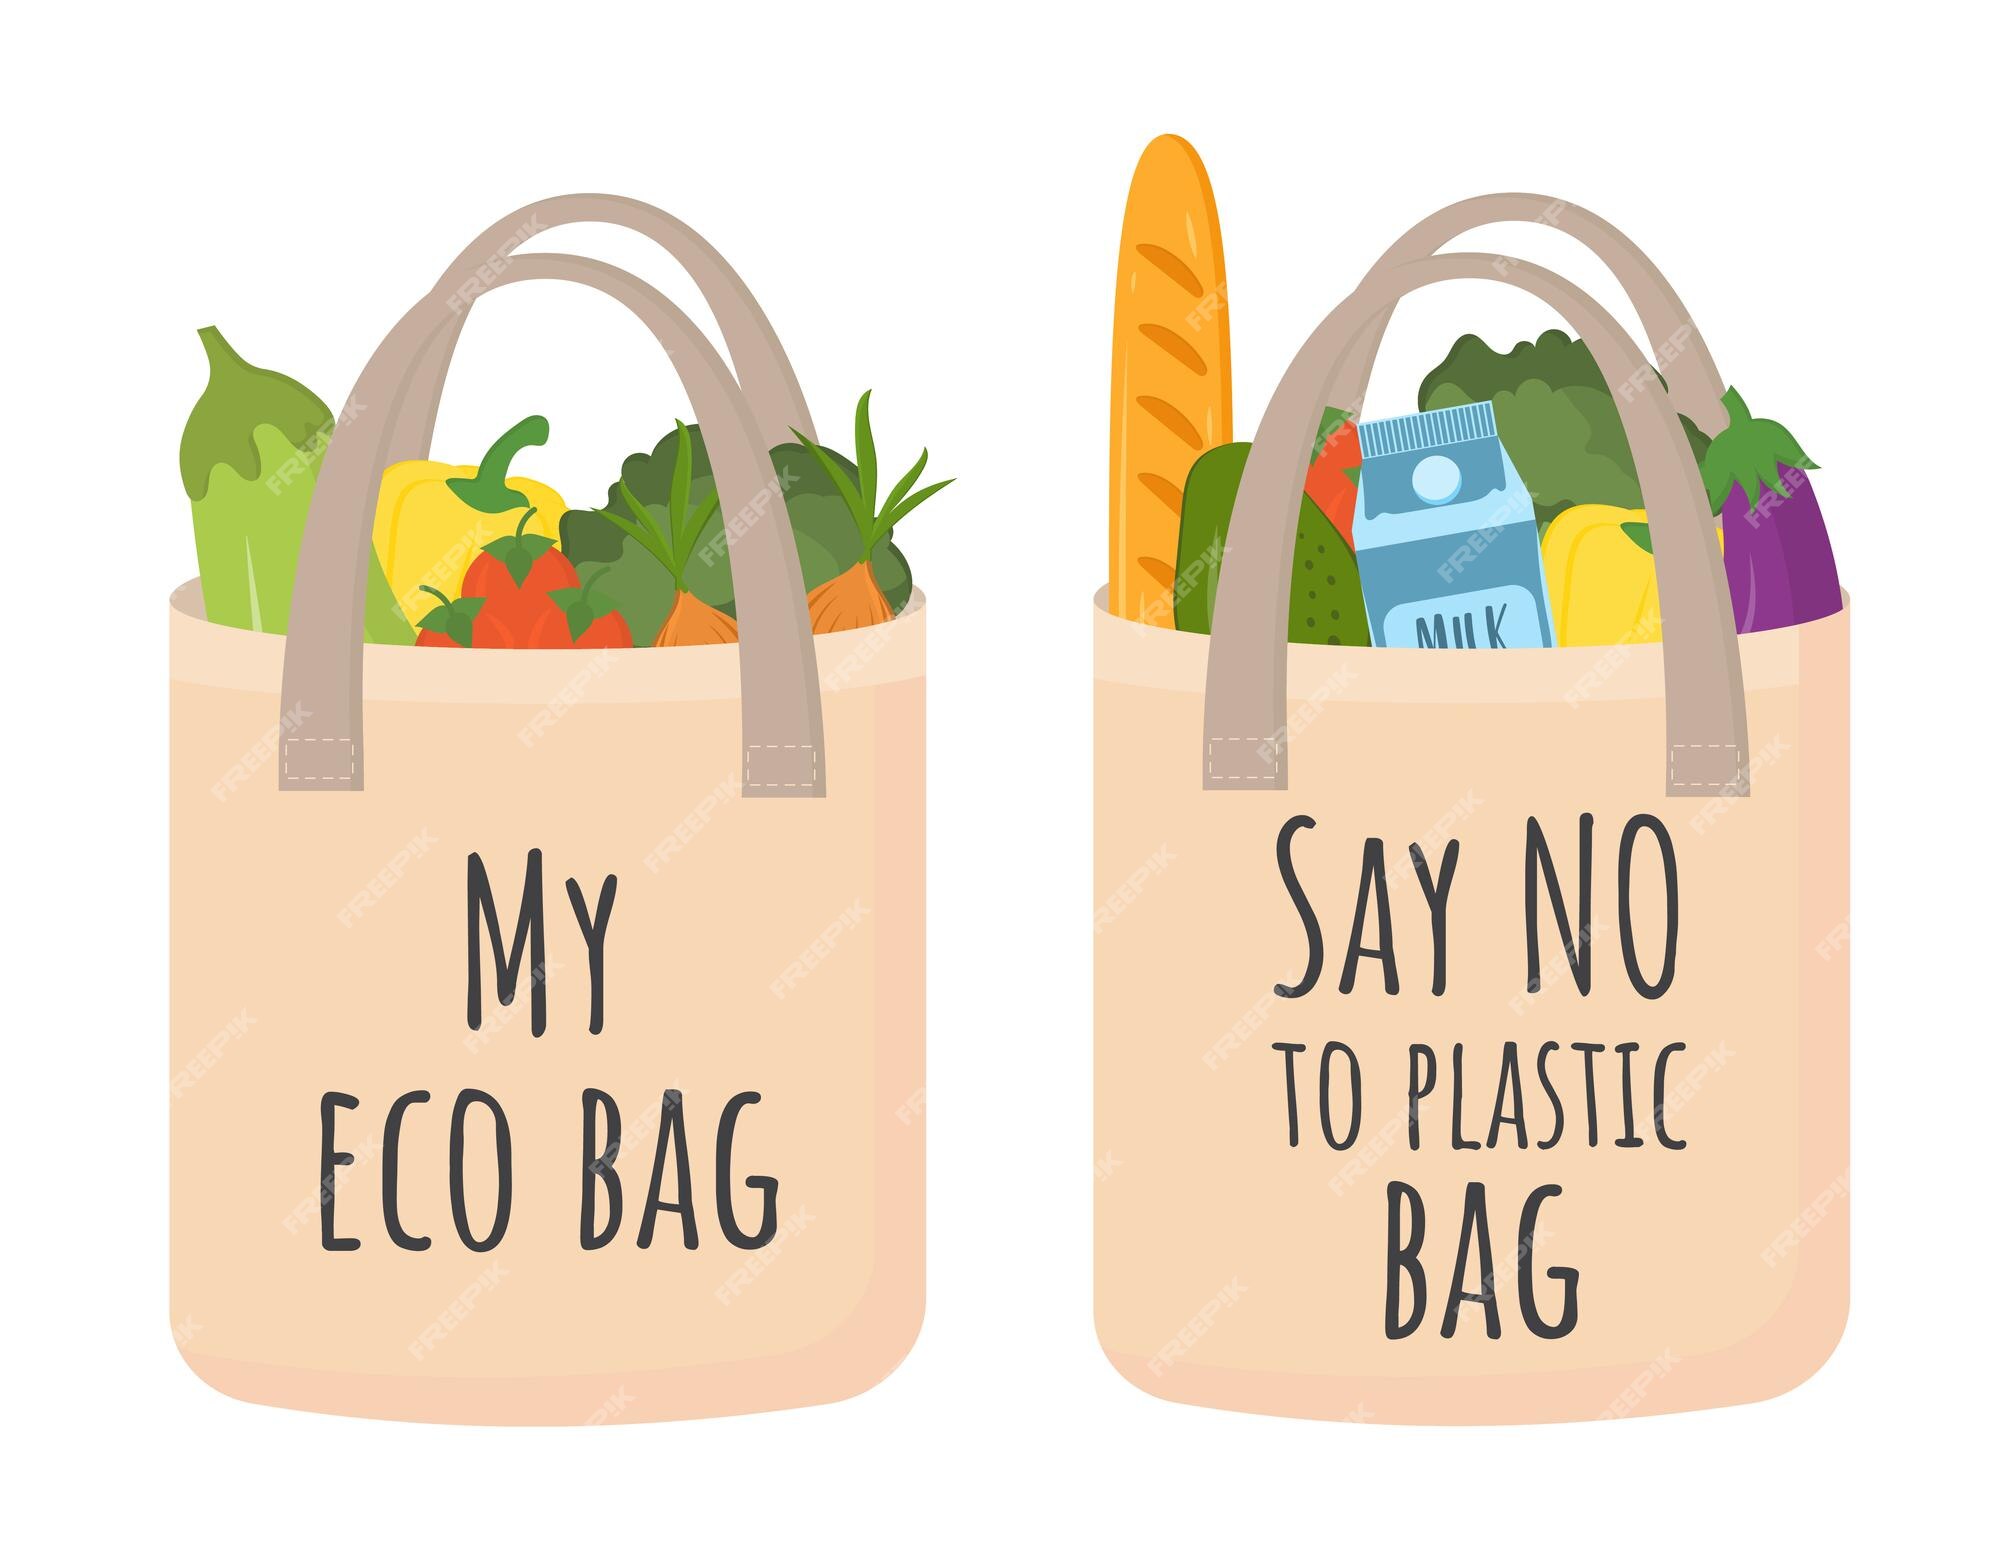 25+ Reasons Why Use Reusable Grocery Bags (Updated)